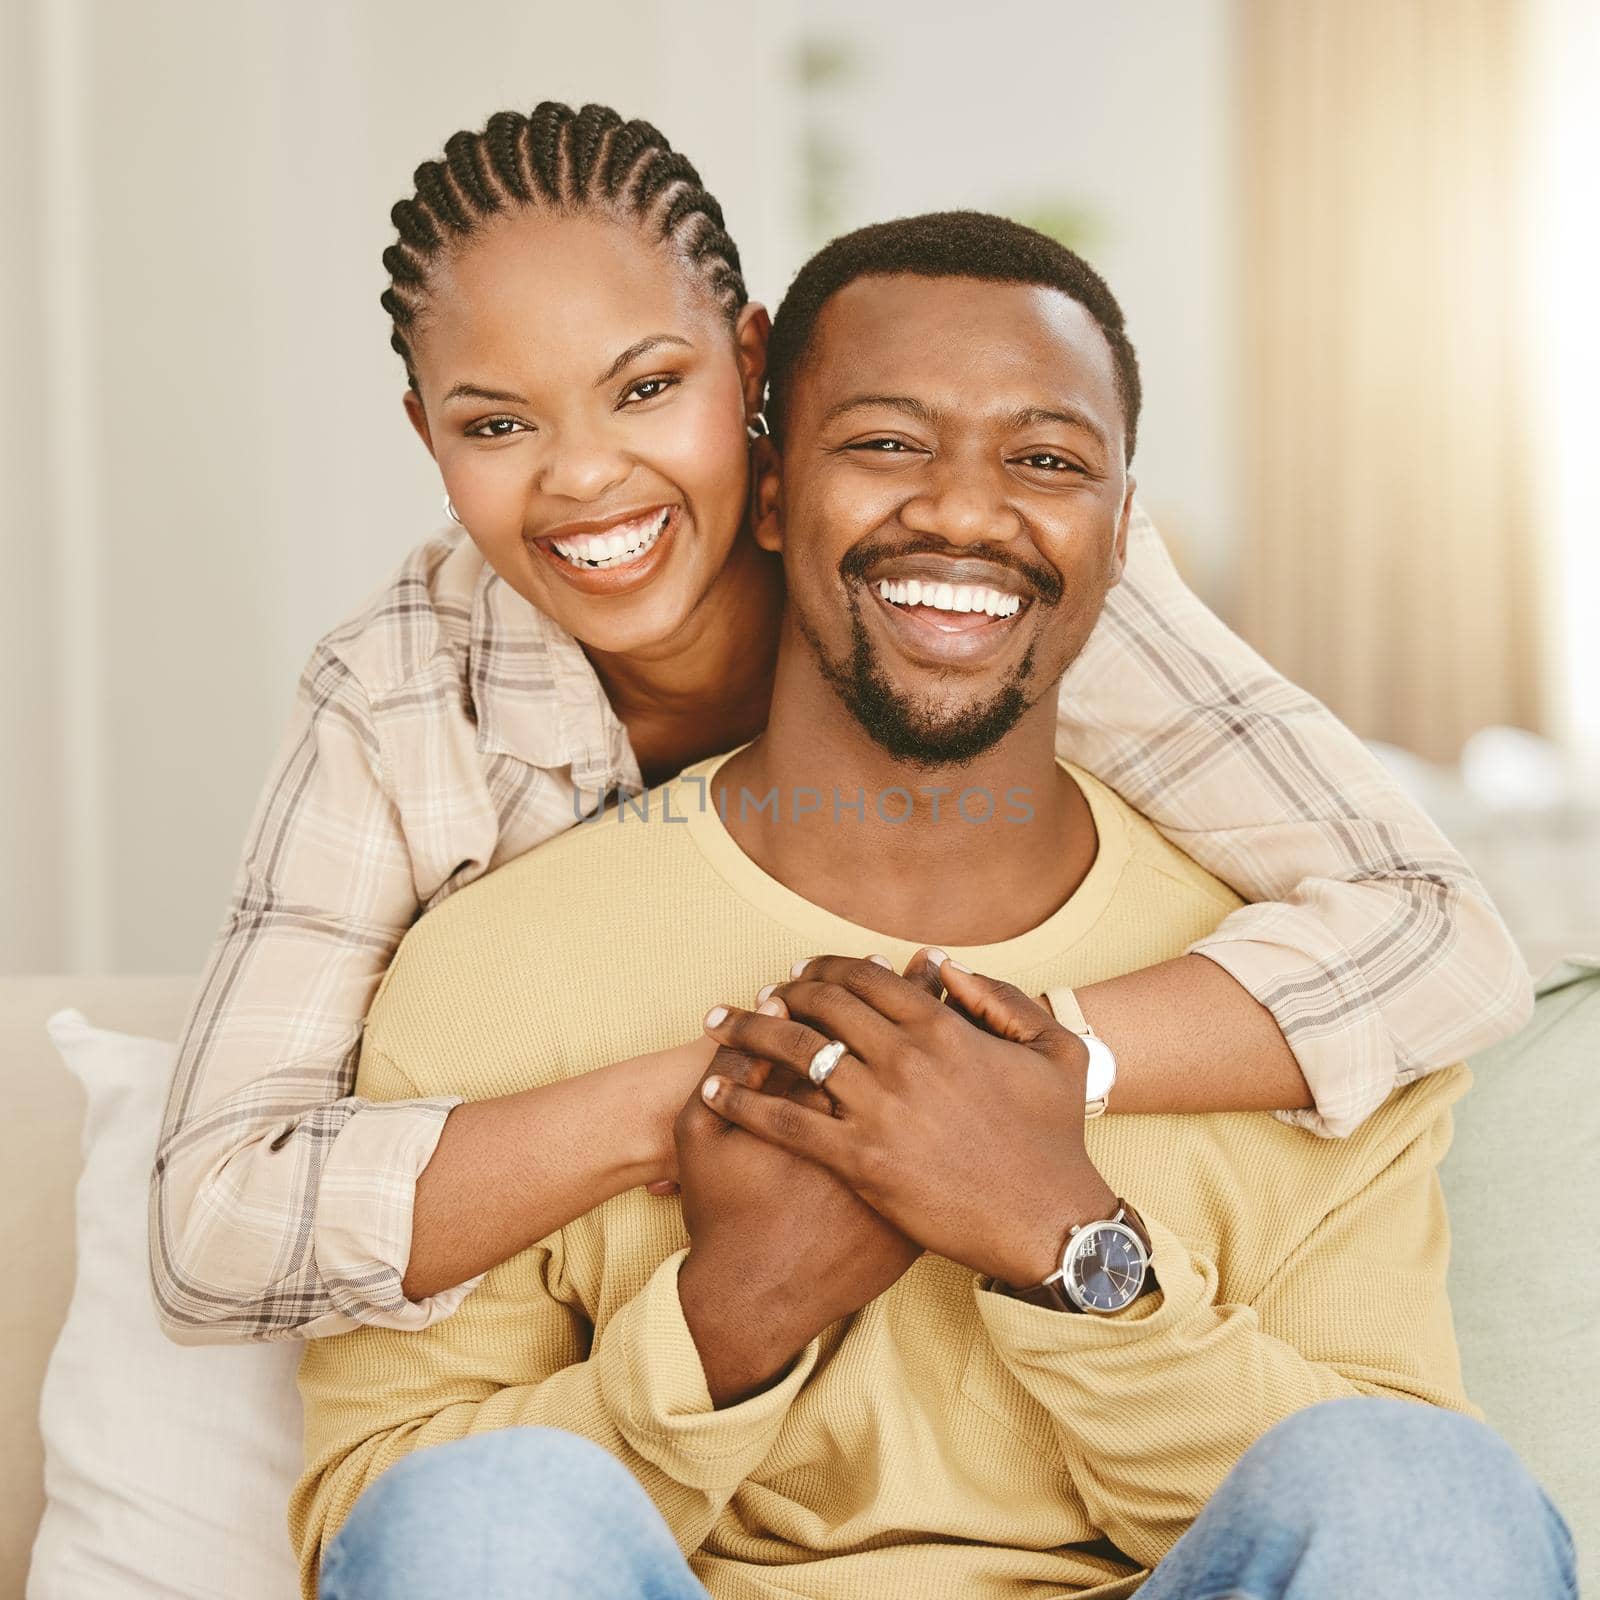 When love comes around, hold on to it. an affectionate couple spending time together at home